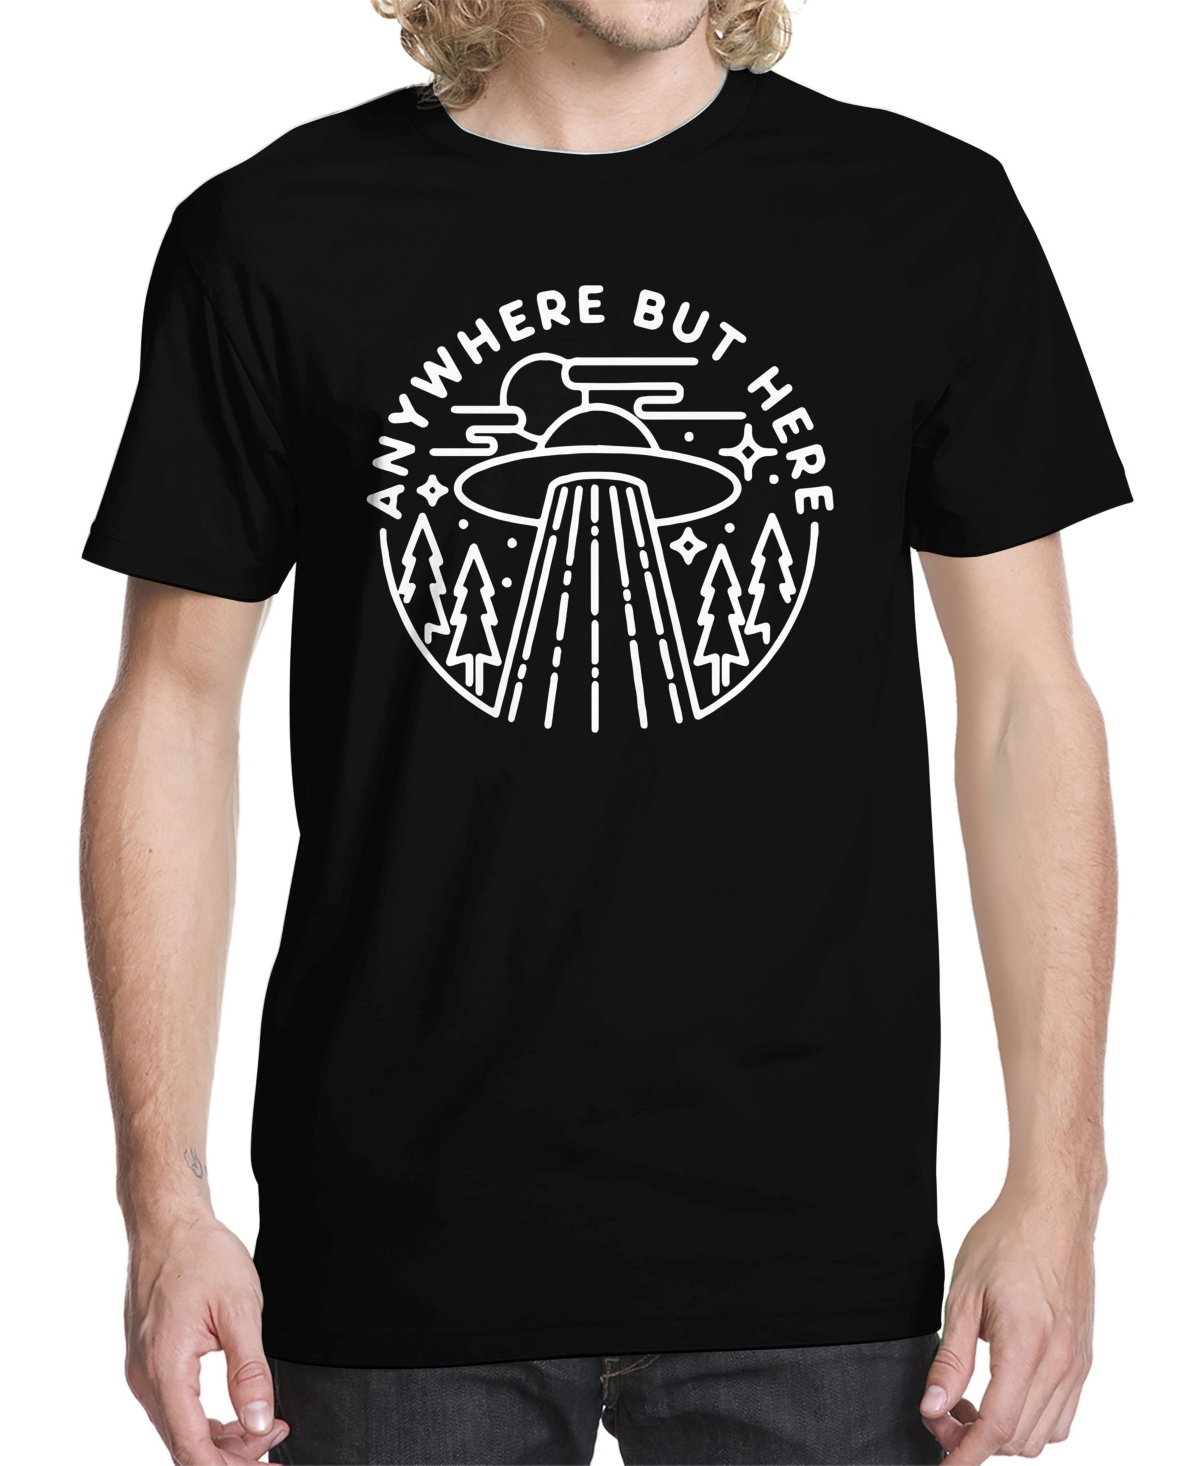 Buzz Shirts Men's Anywhere But Here Graphic T-shirt